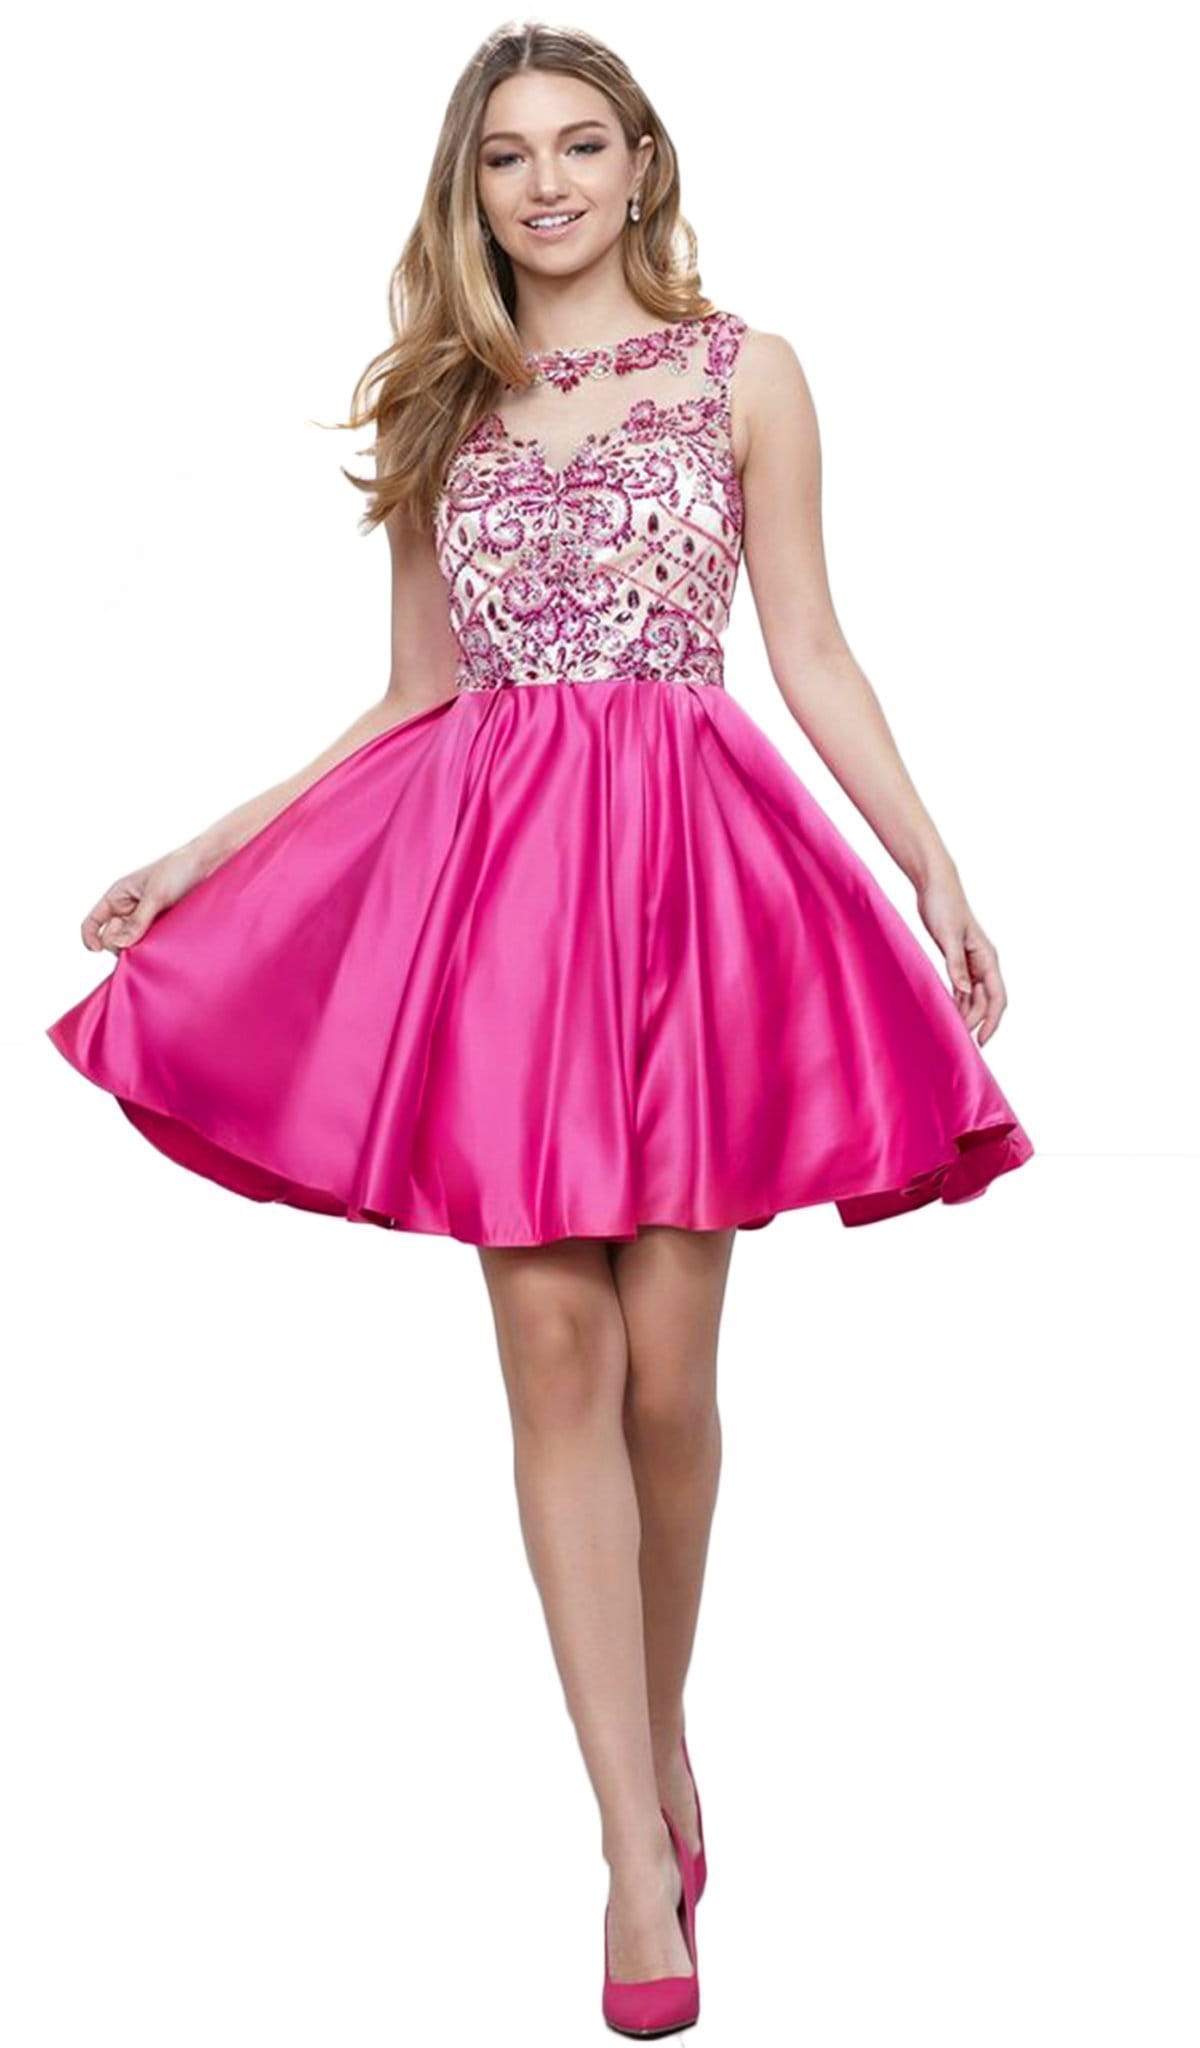 Nox Anabel - 6059 Sleeveless Illusion Adorned Cocktail Dress Special Occasion Dress XS / Fuchsia